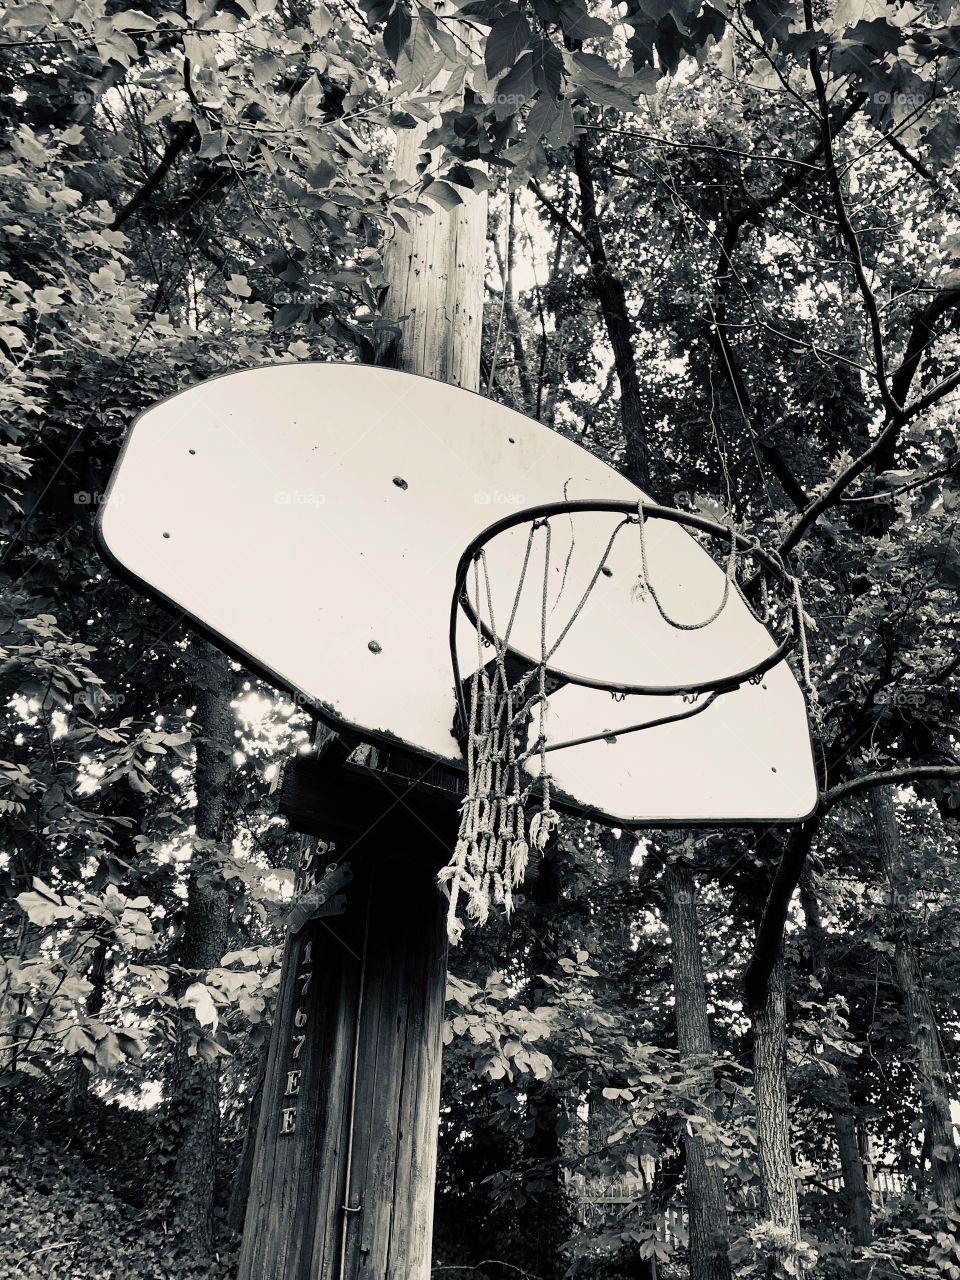 Basketball hoop on a telephone pole with an old, ragged net surrounded by trees. Silvertone, black and white finish. 